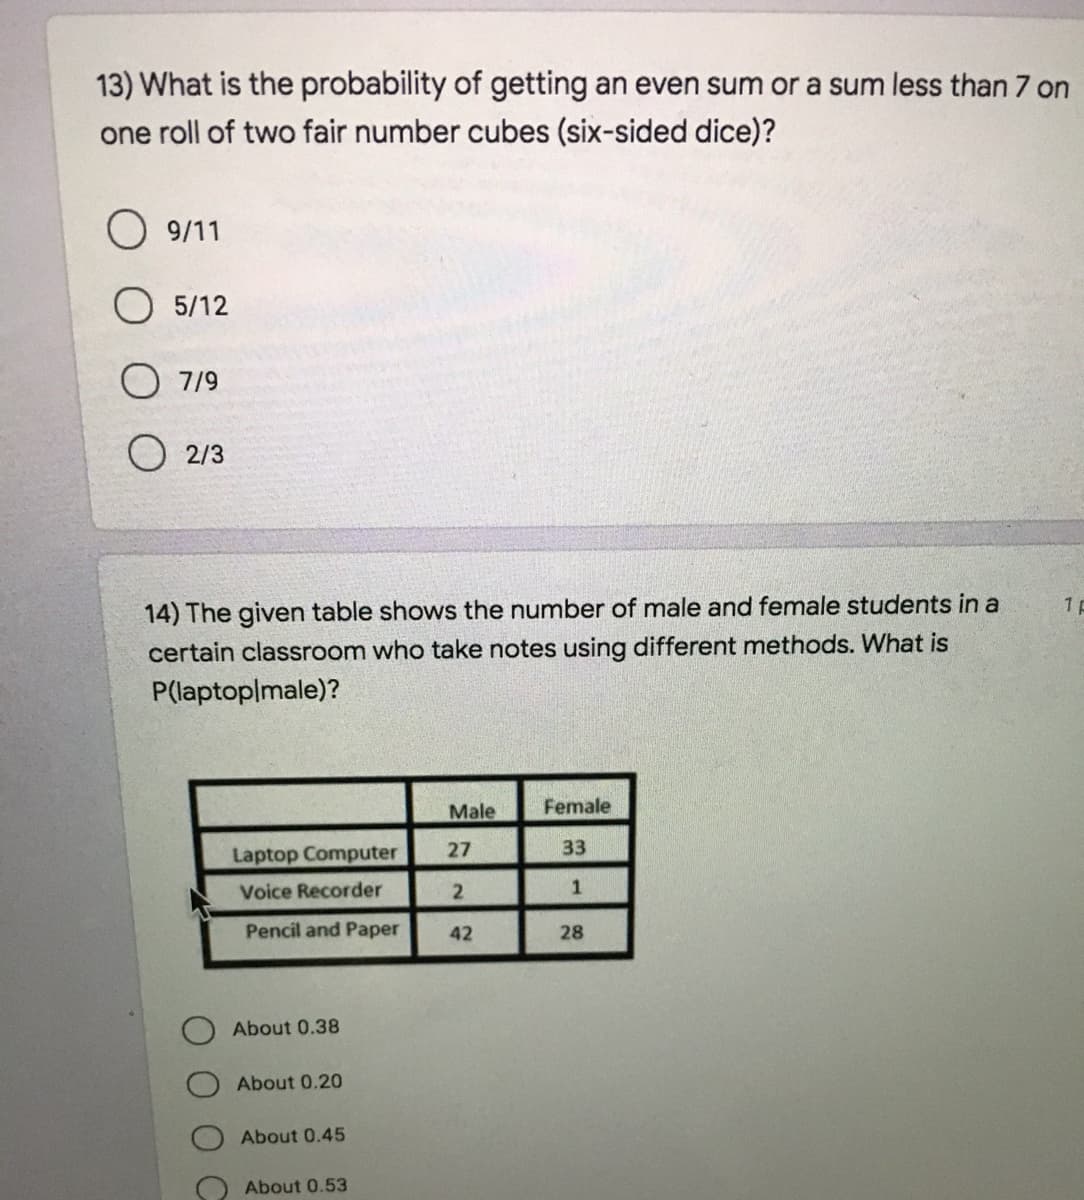 13) What is the probability of getting an even sum or a sum less than 7 on
one roll of two fair number cubes (six-sided dice)?
O 9/11
5/12
O 7/9
O 2/3
14) The given table shows the number of male and female students in a
certain classroom who take notes using different methods. What is
P(laptoplmale)?
Male
Female
Laptop Computer
27
33
Voice Recorder
1
Pencil and Paper
42
28
About 0.38
About 0.20
About 0.45
About 0.53
